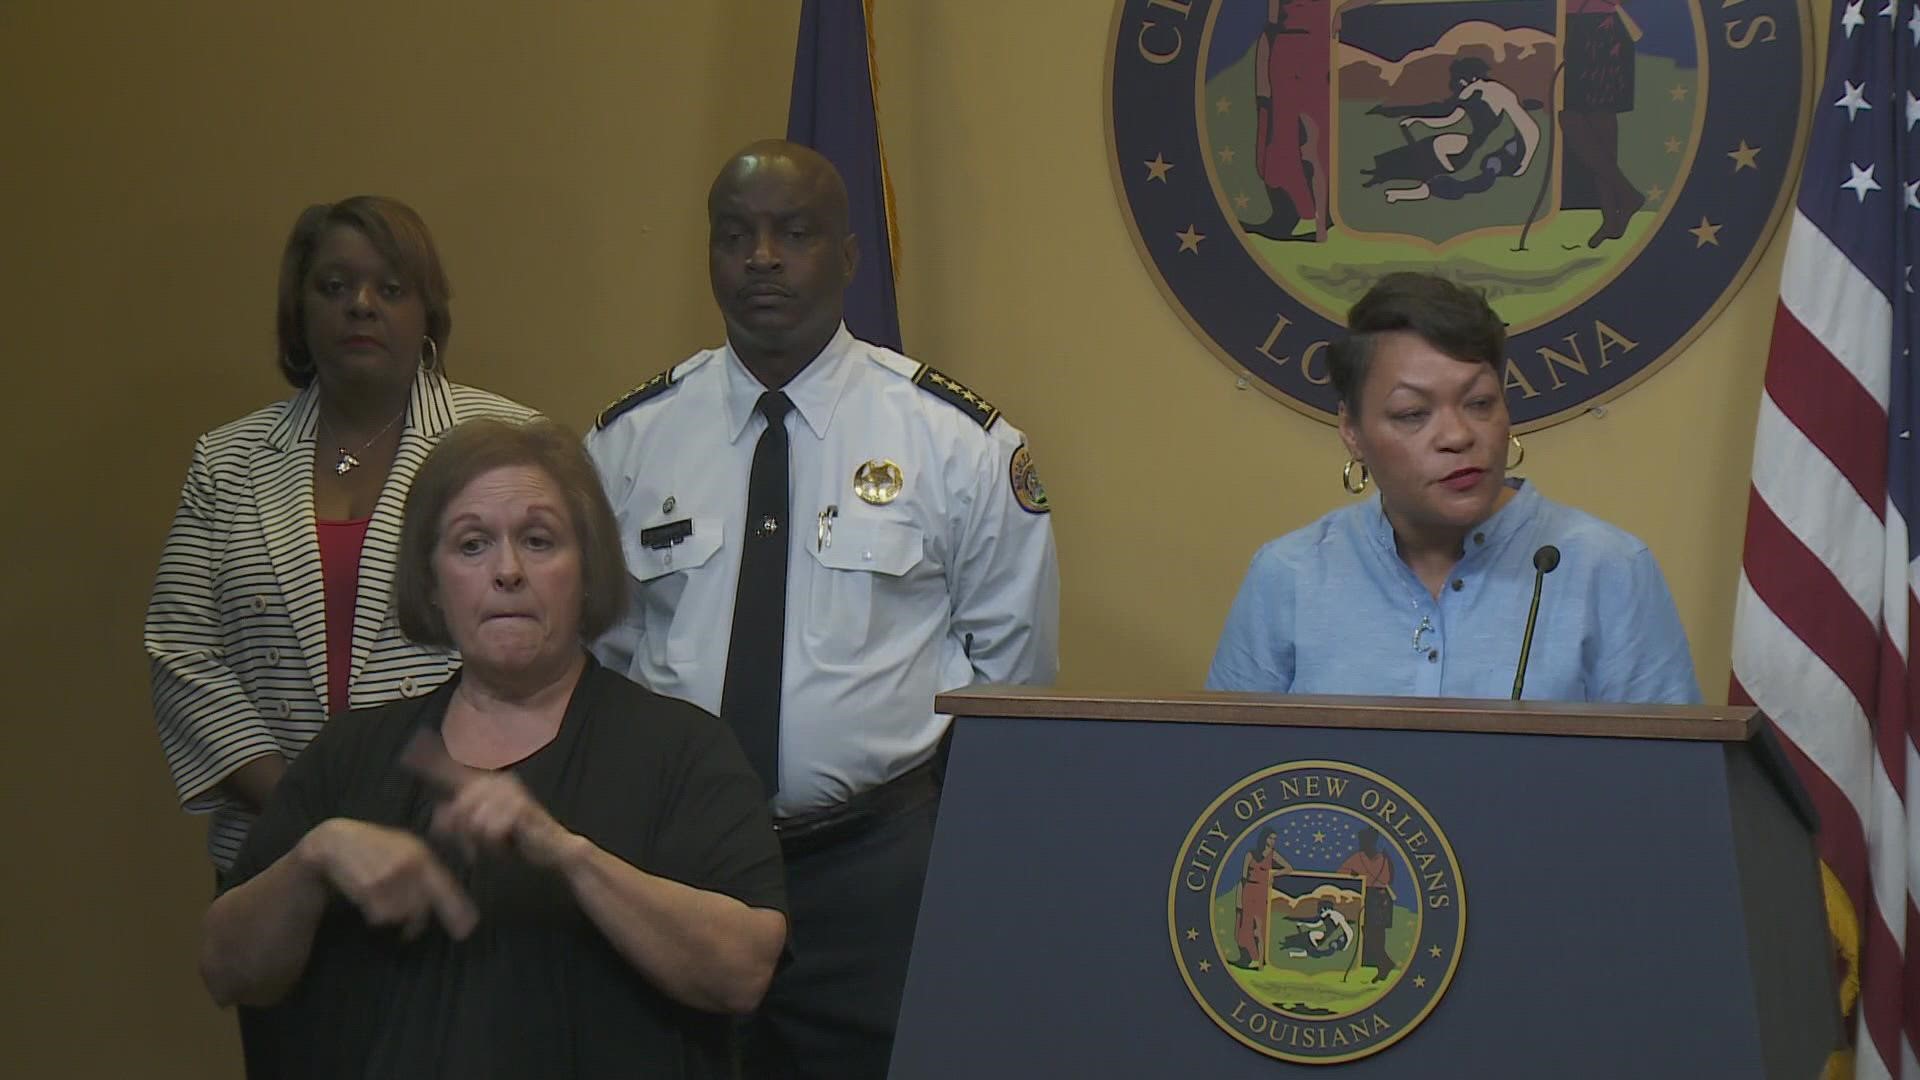 New Orleans Mayor LaToya Cantrell described the staffing situation at the department as a "crisis."